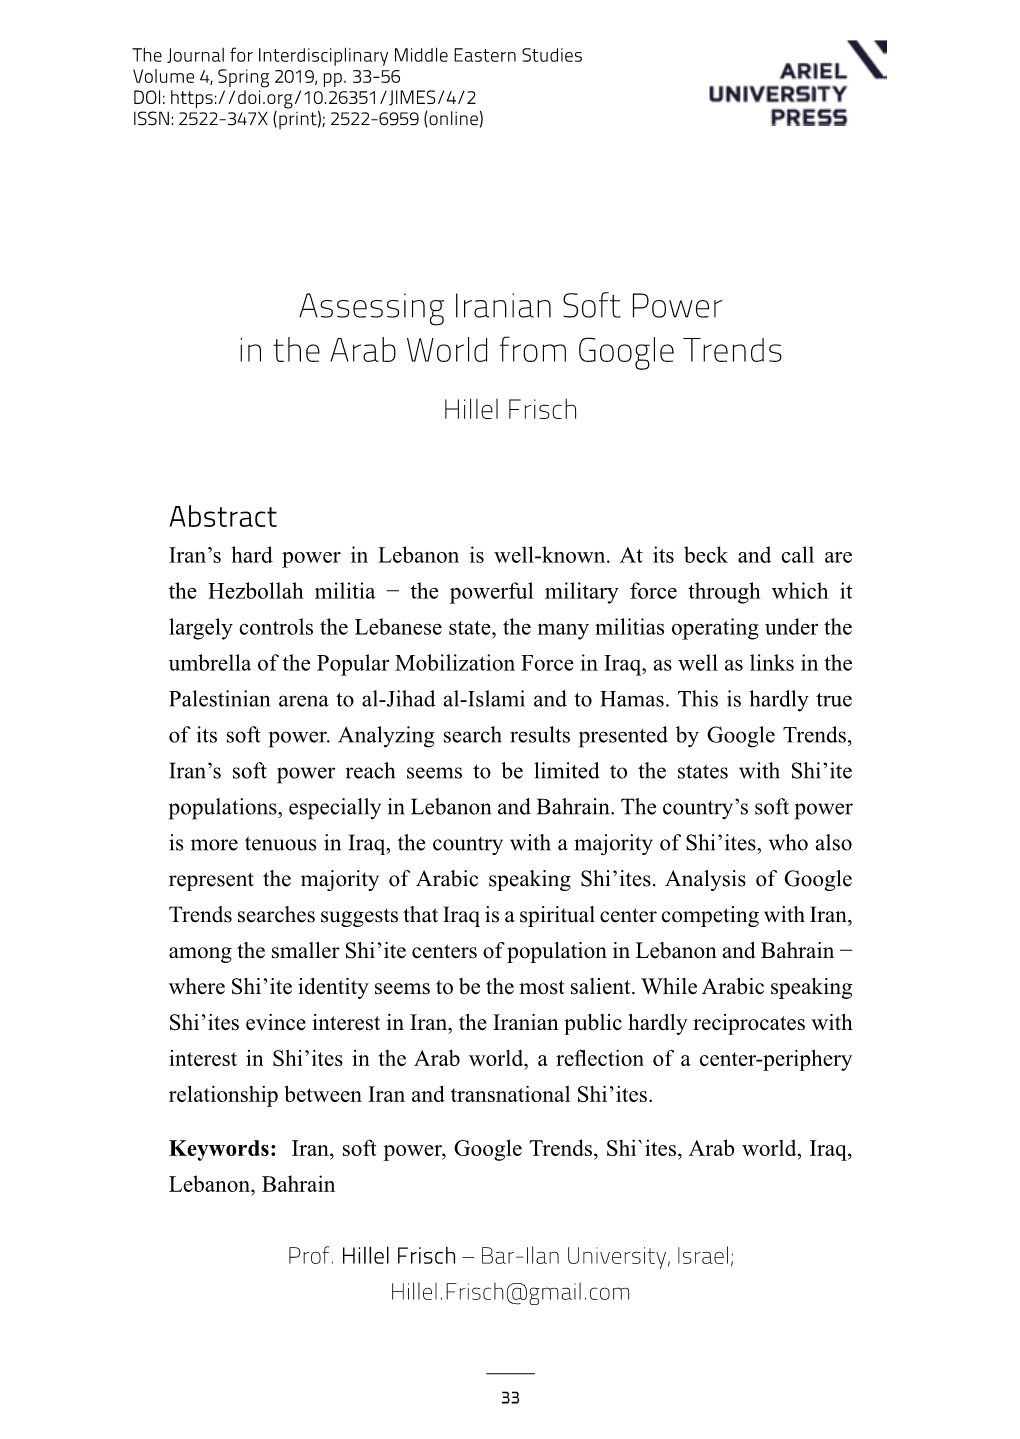 Assessing Iranian Soft Power in the Arab World from Google Trends